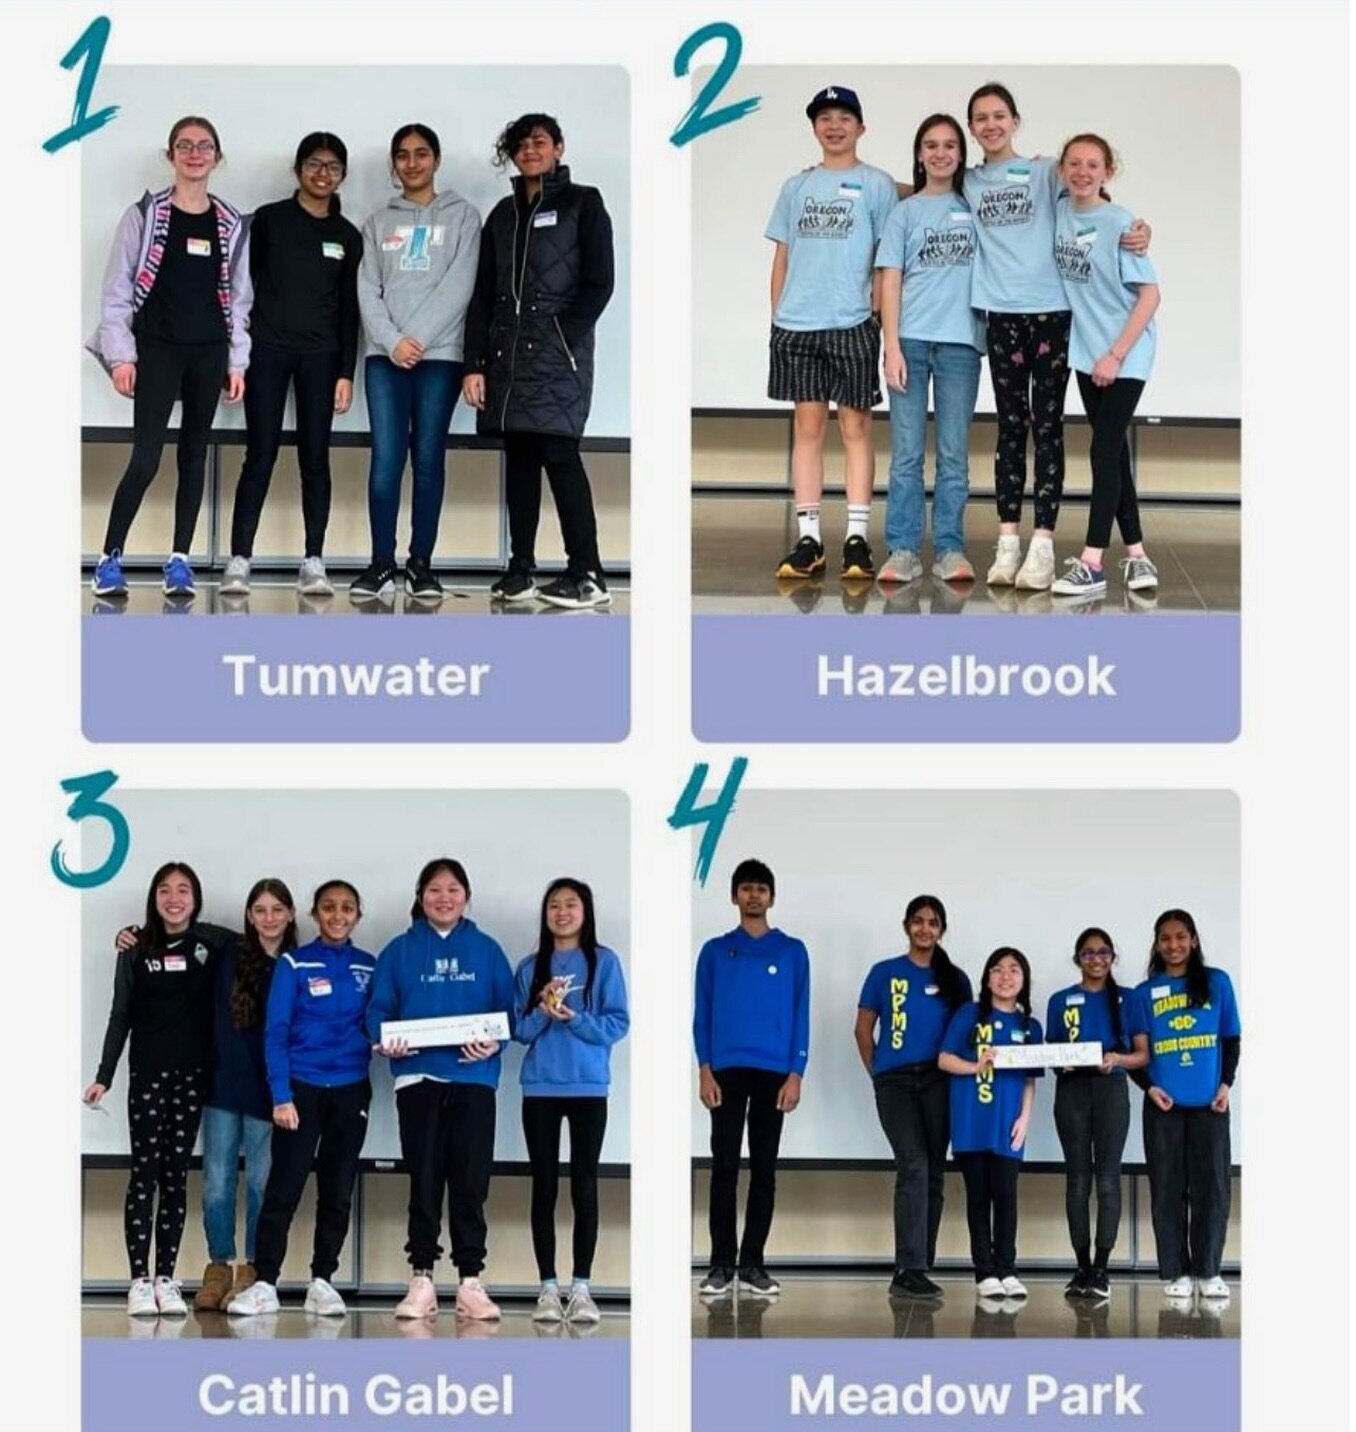 Congratulations to all who participated in the OBOB Region 1E Gr. 6-8 tournament this weekend at Twality Middle School. Everyone did an awesome job and should be proud. 

Here are the top 4 teams. Way to go, Tumwater students! Next stop, State Champi